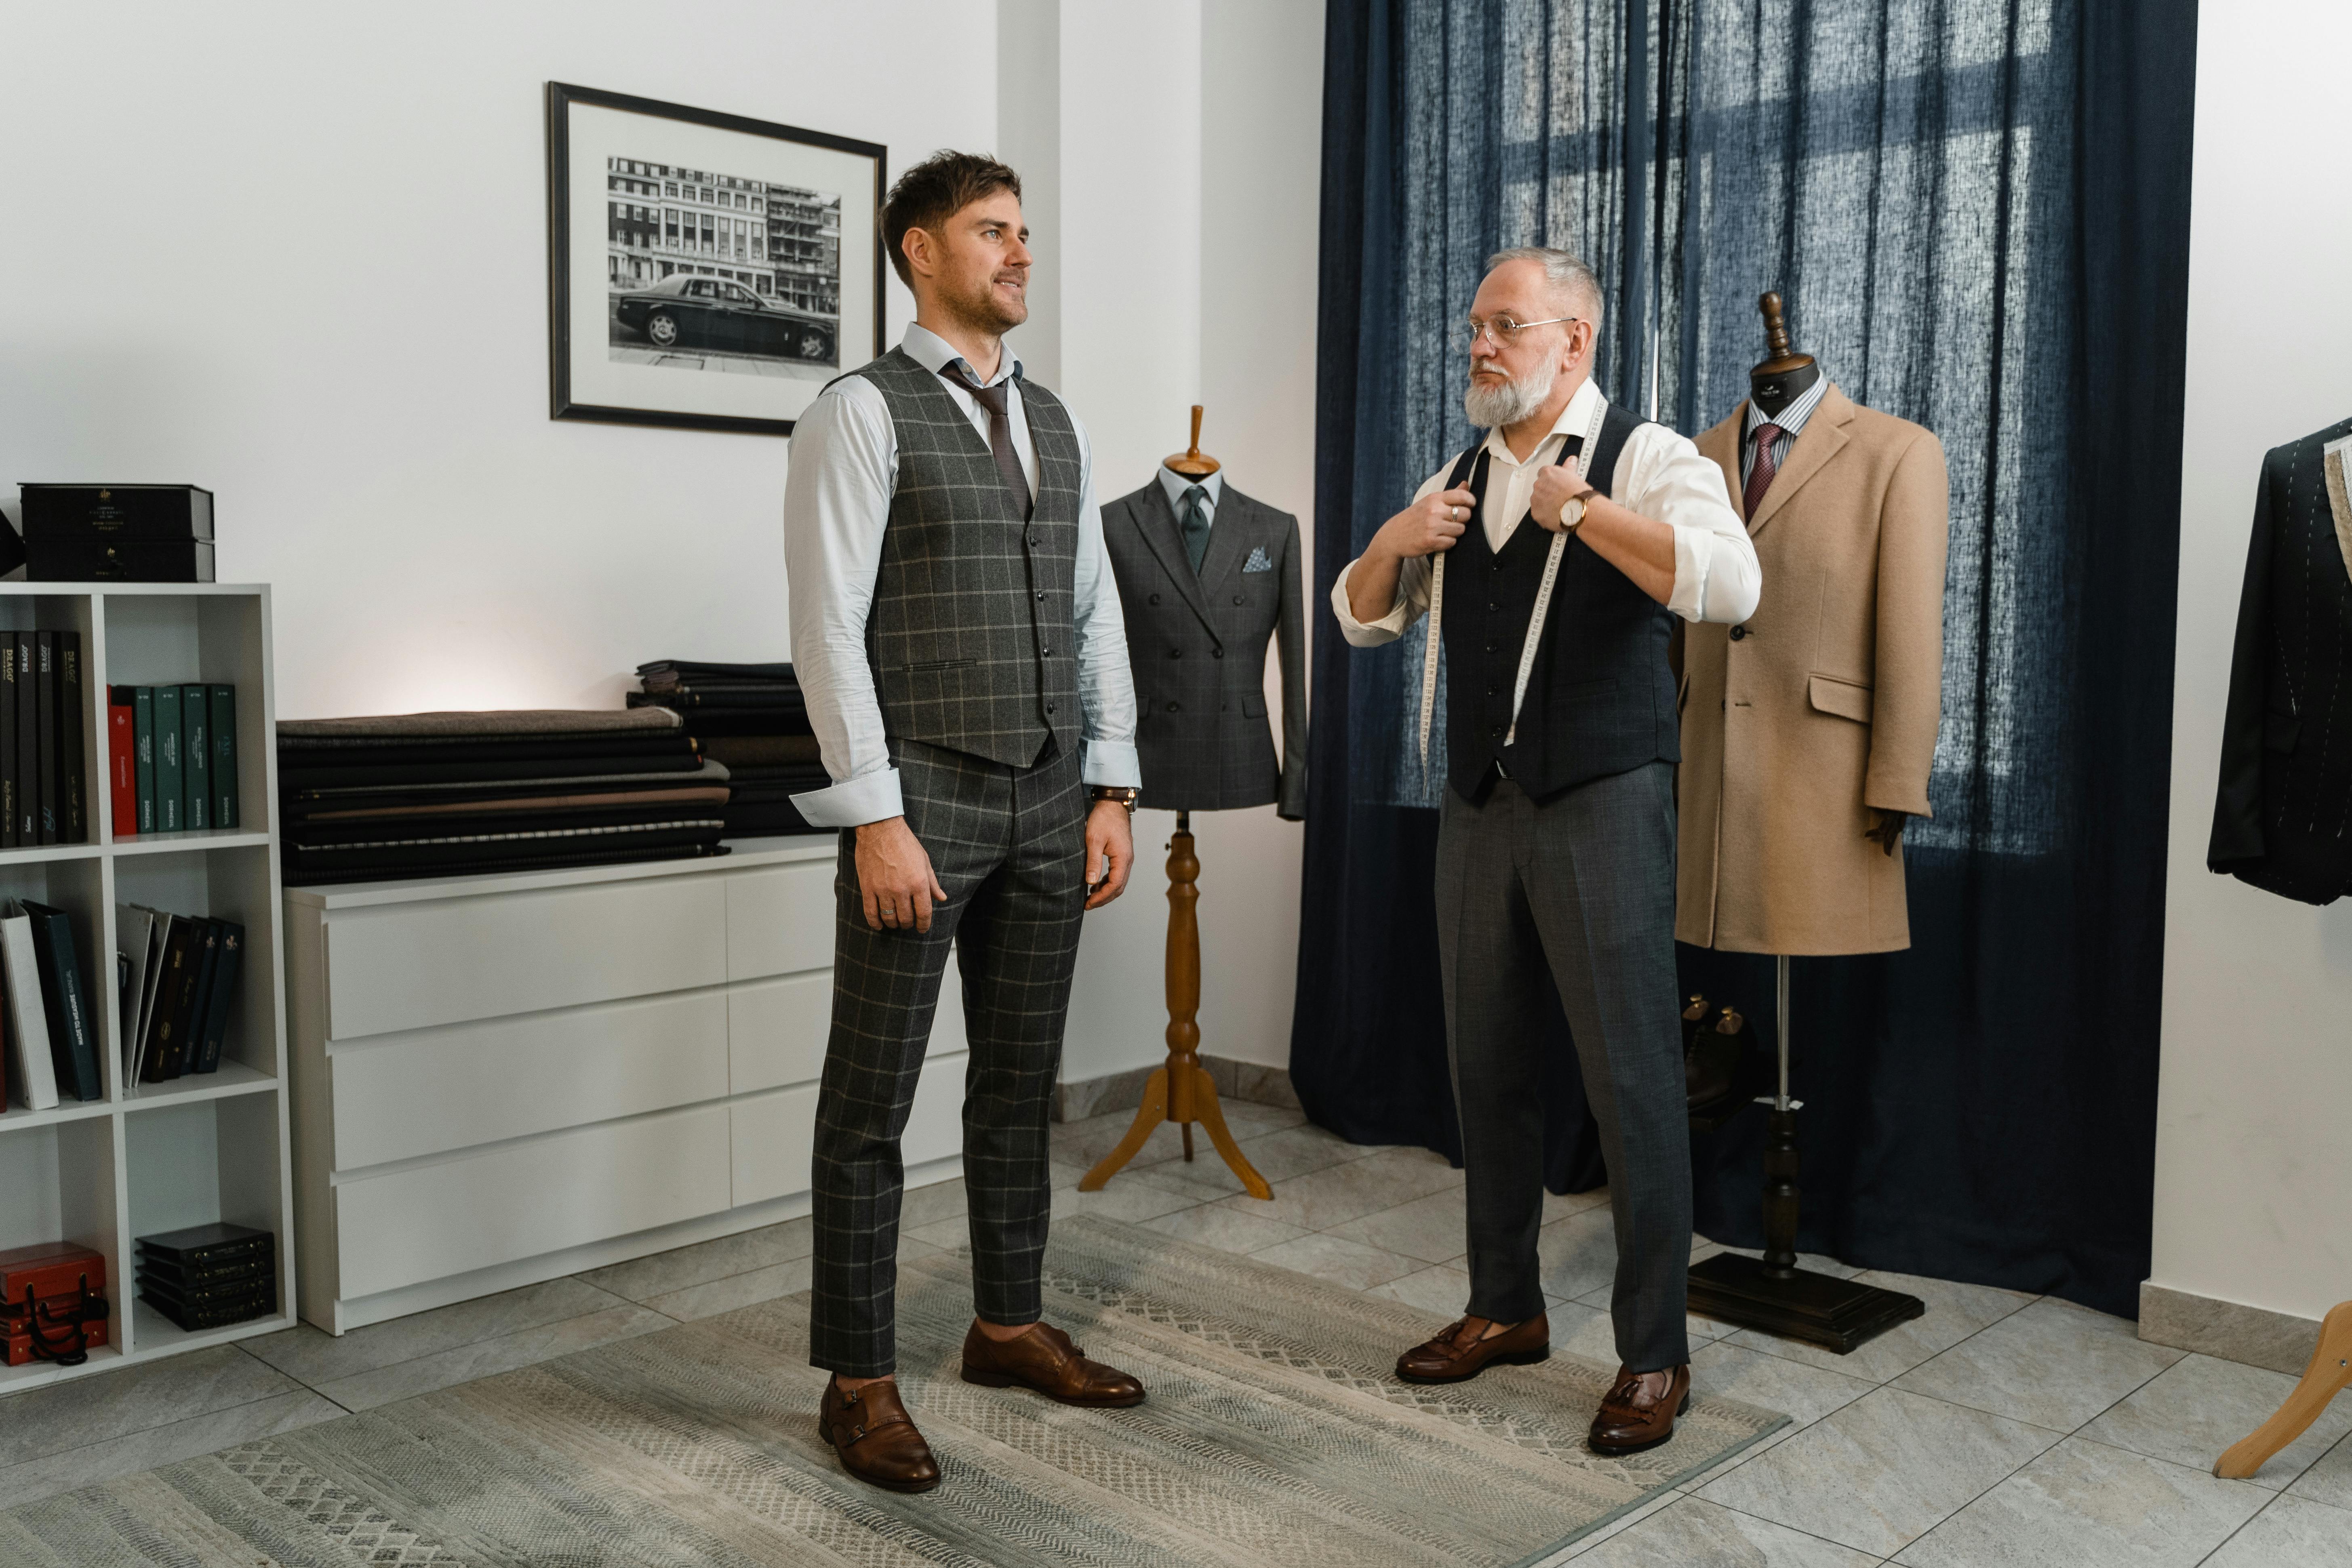 A man during a suit fitting | Source: Pexels